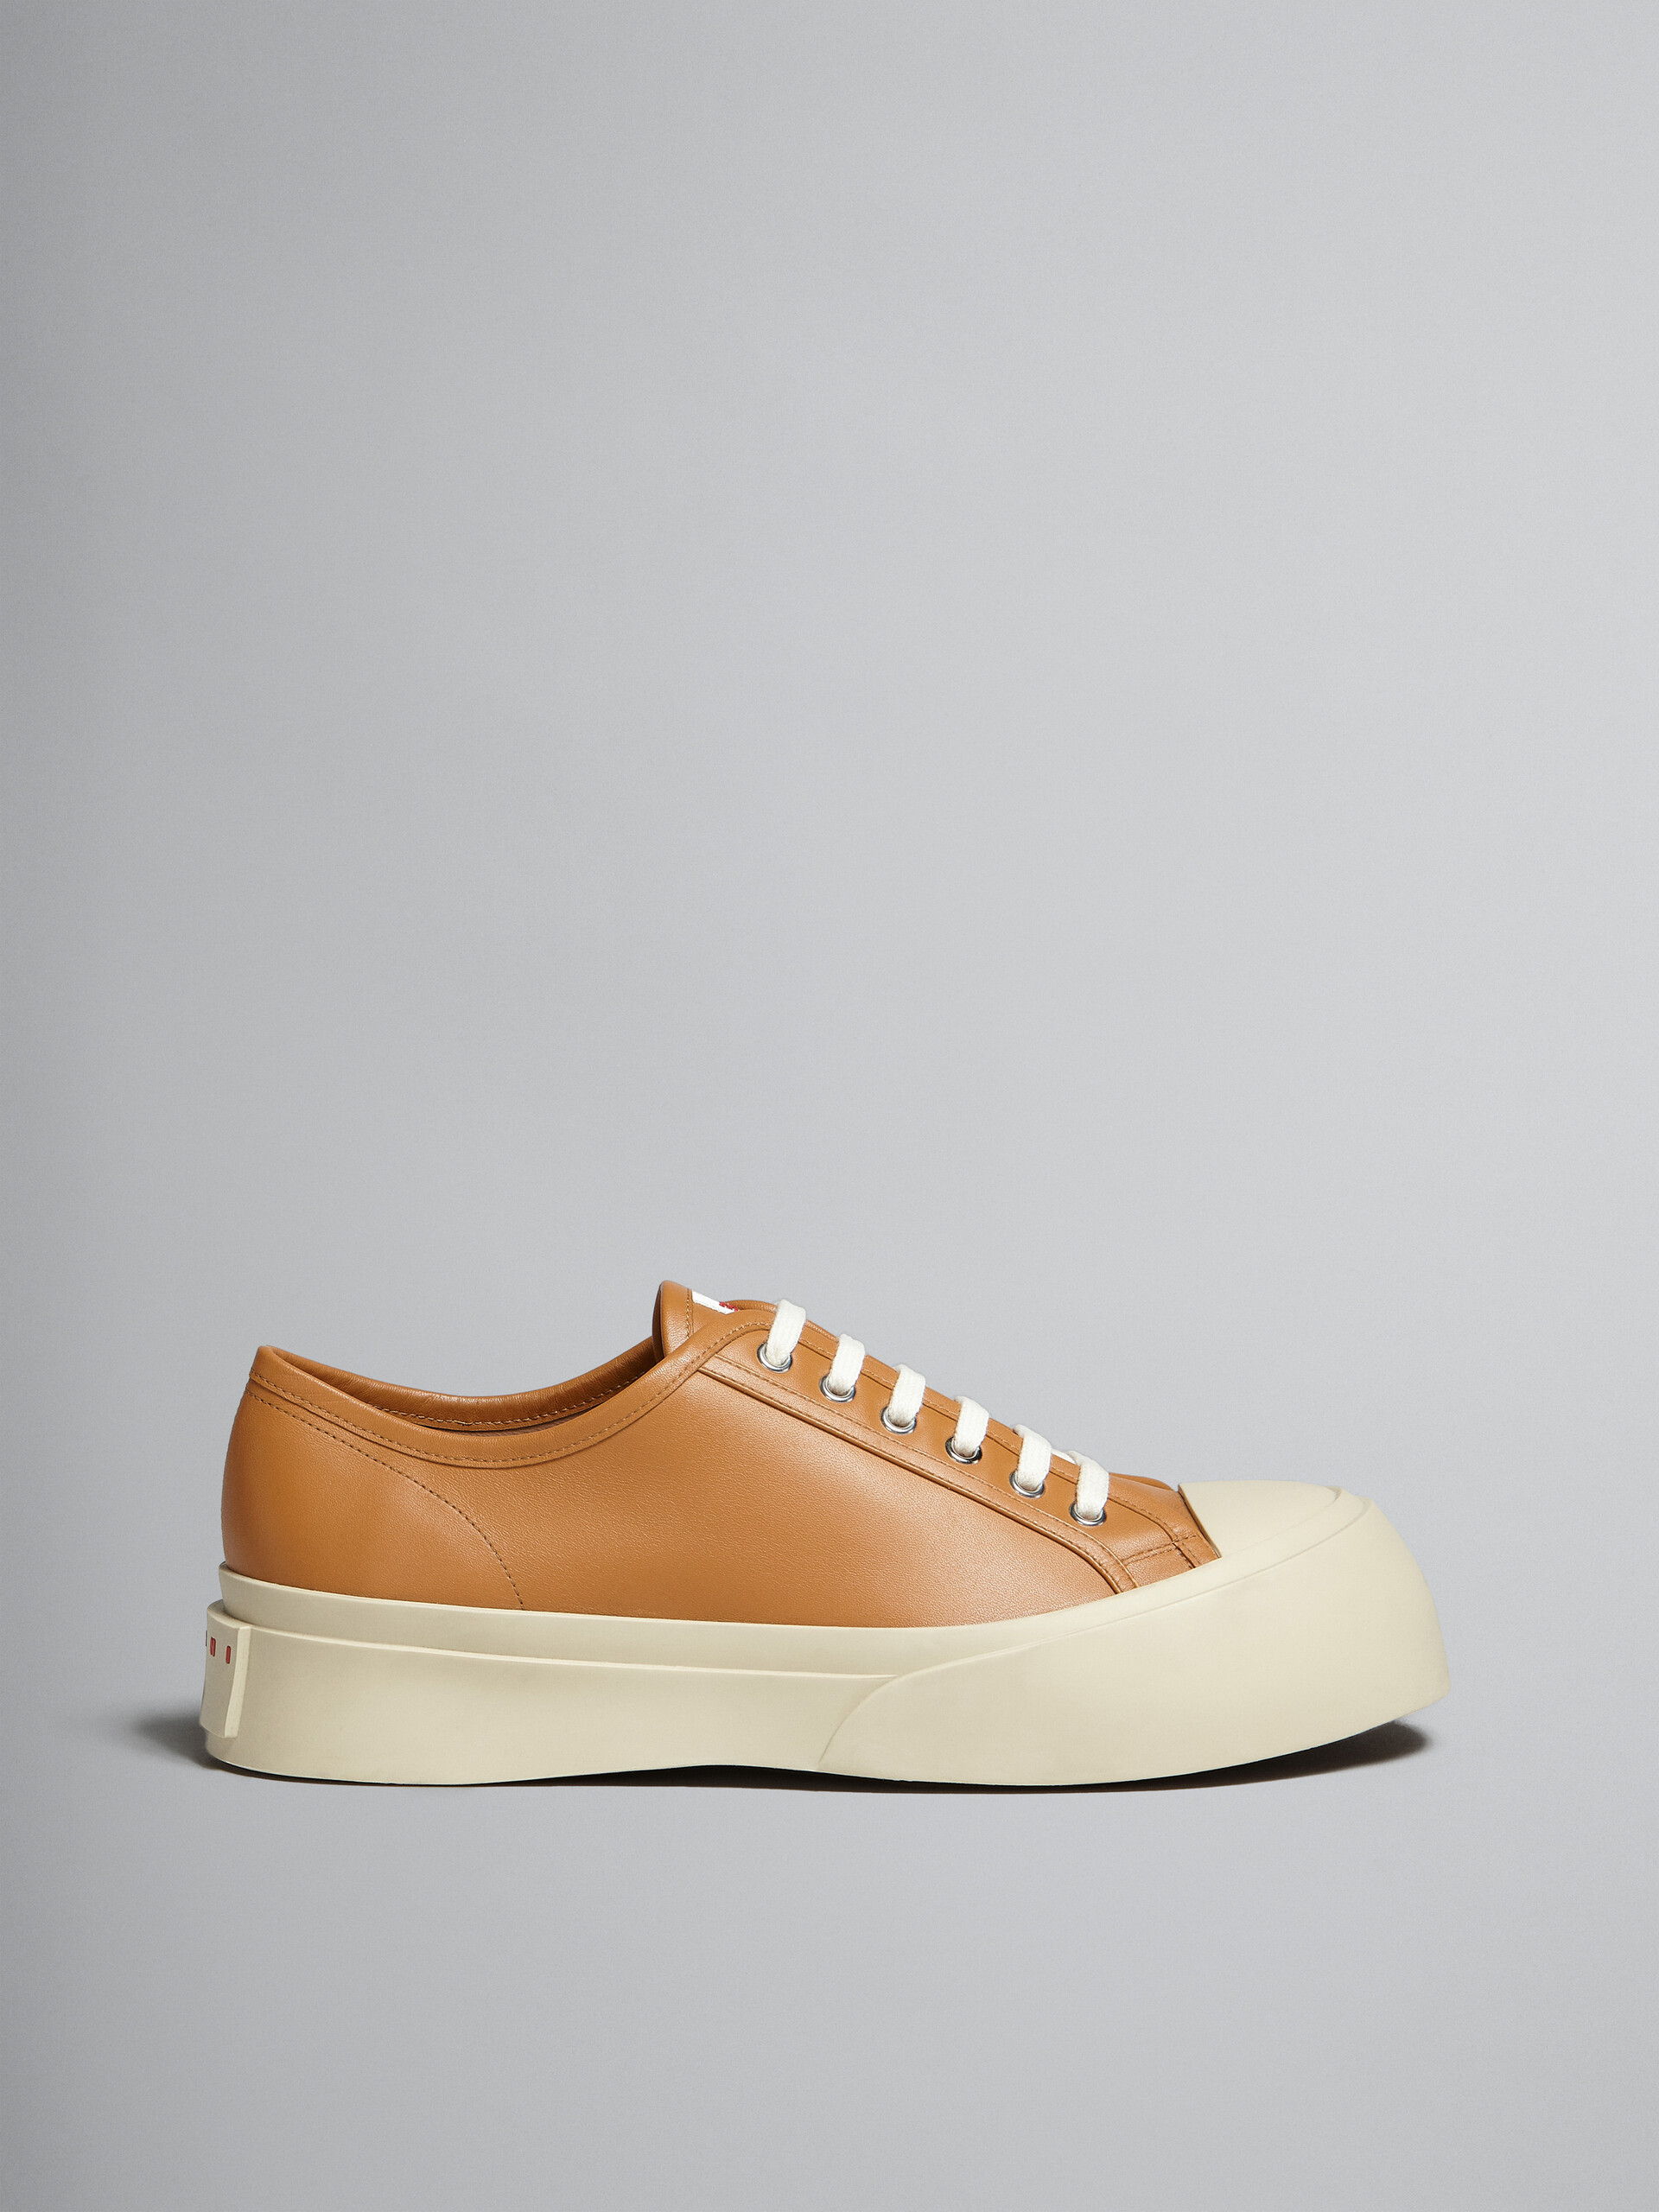 Brown nappa leather Pablo sneaker - Sneakers - Image 1